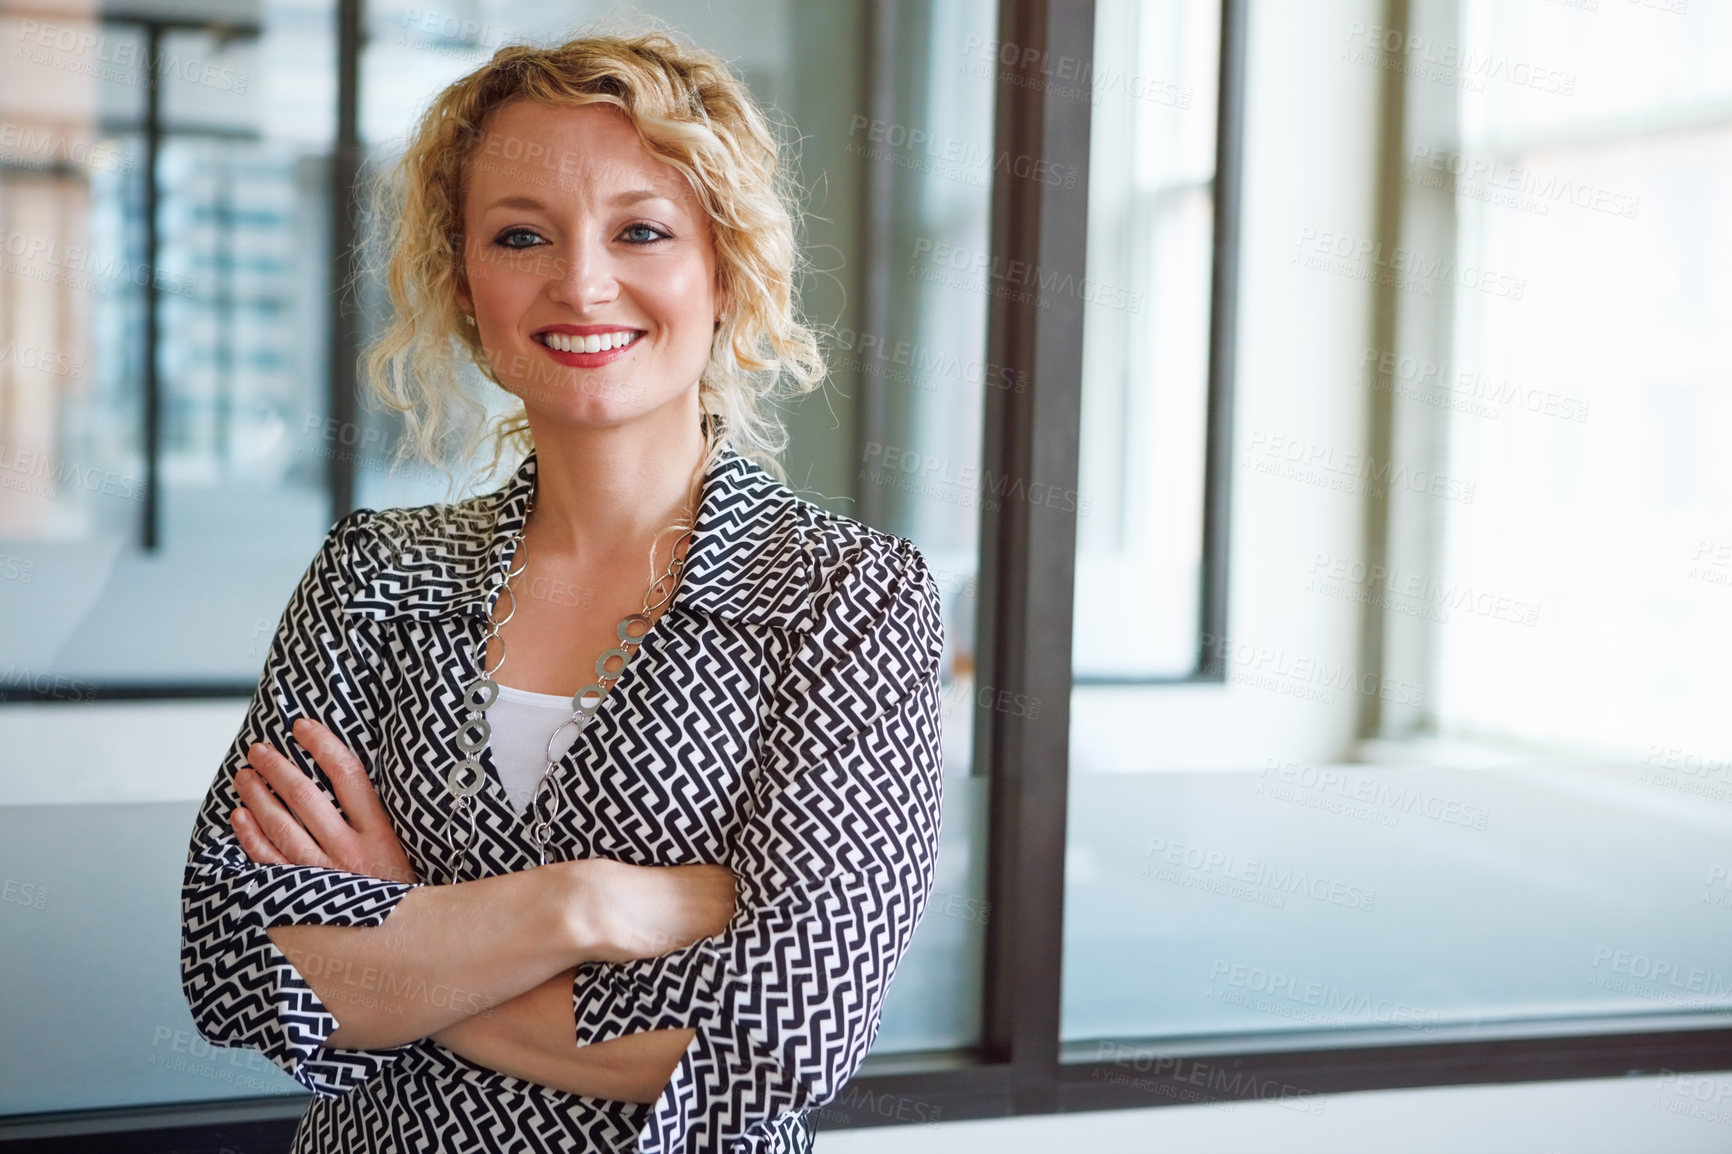 Buy stock photo Portrait of businesswomen smiling confidently while standing in office